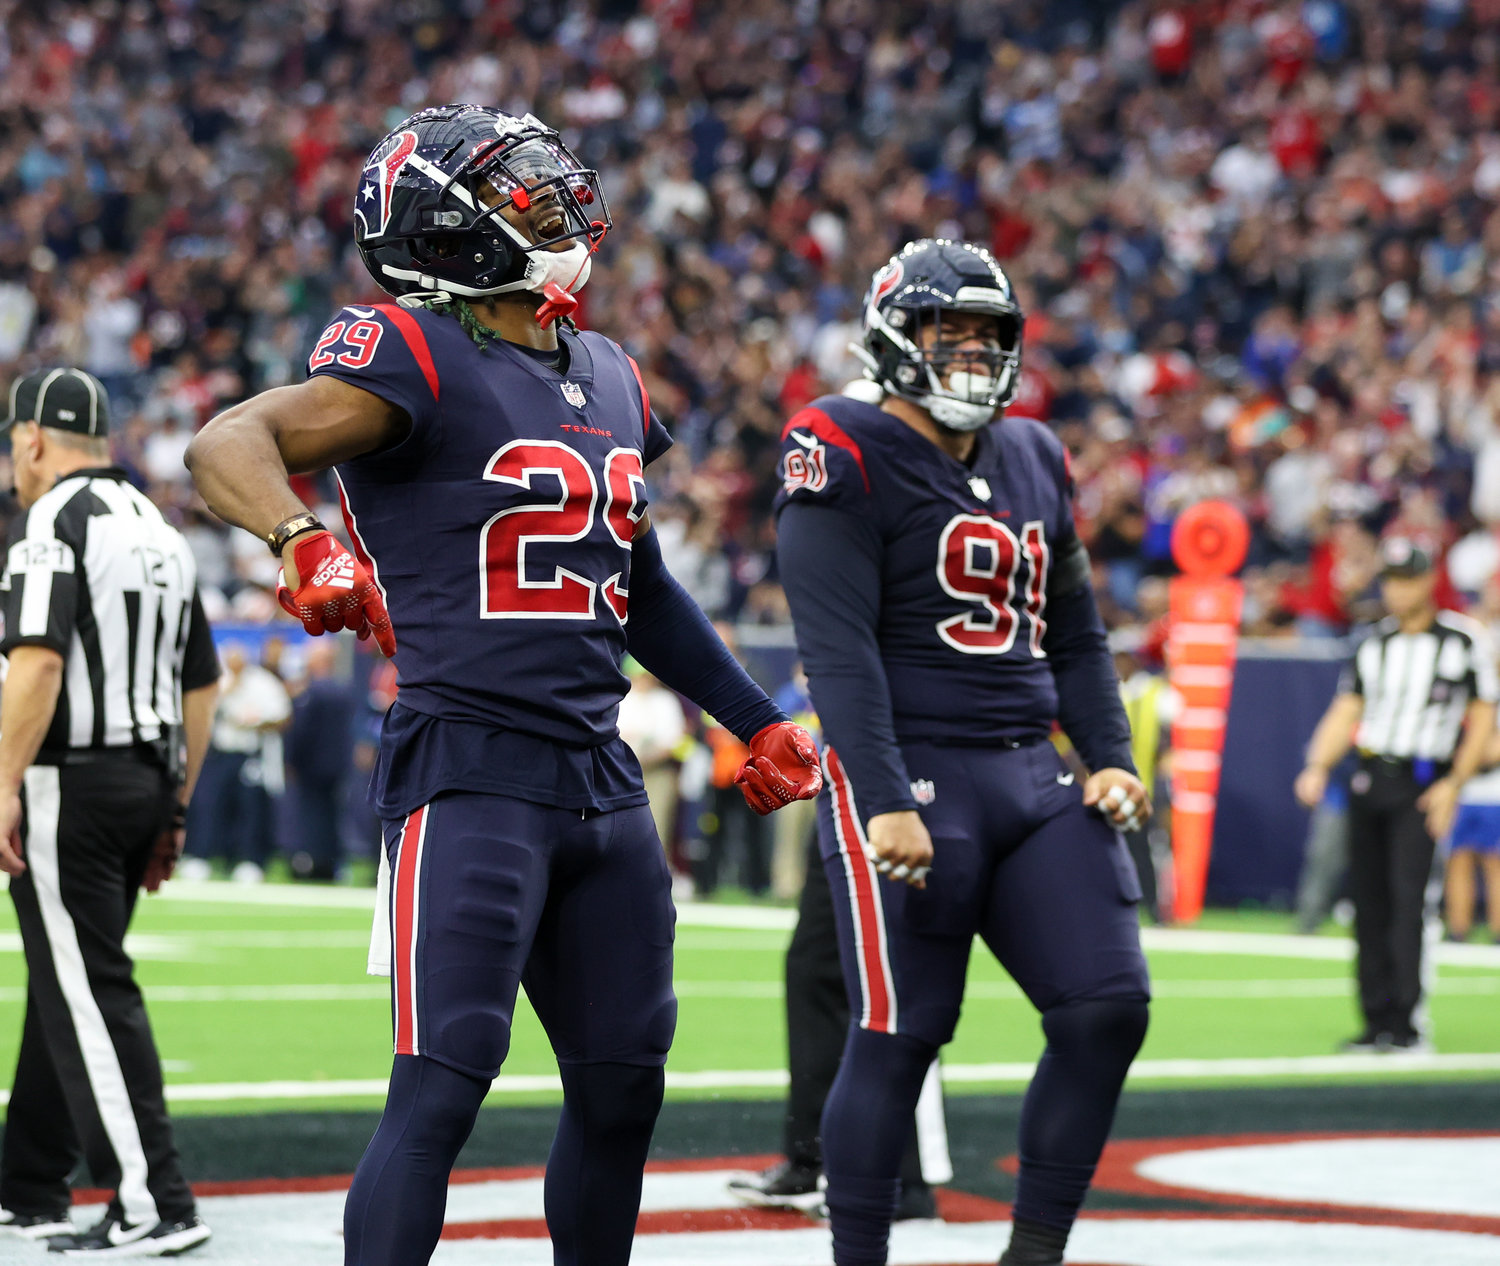 Houston Texans safety M.J. Stewart (29) and defensive tackle Roy Lopez (91) reacts after the Texans stopped Cleveland Browns running back Nick Chubb in the end zone for a safety during an NFL game between the Houston Texans and the Cleveland Browns on Dec. 4, 2022, in Houston. The Browns won, 27-14.